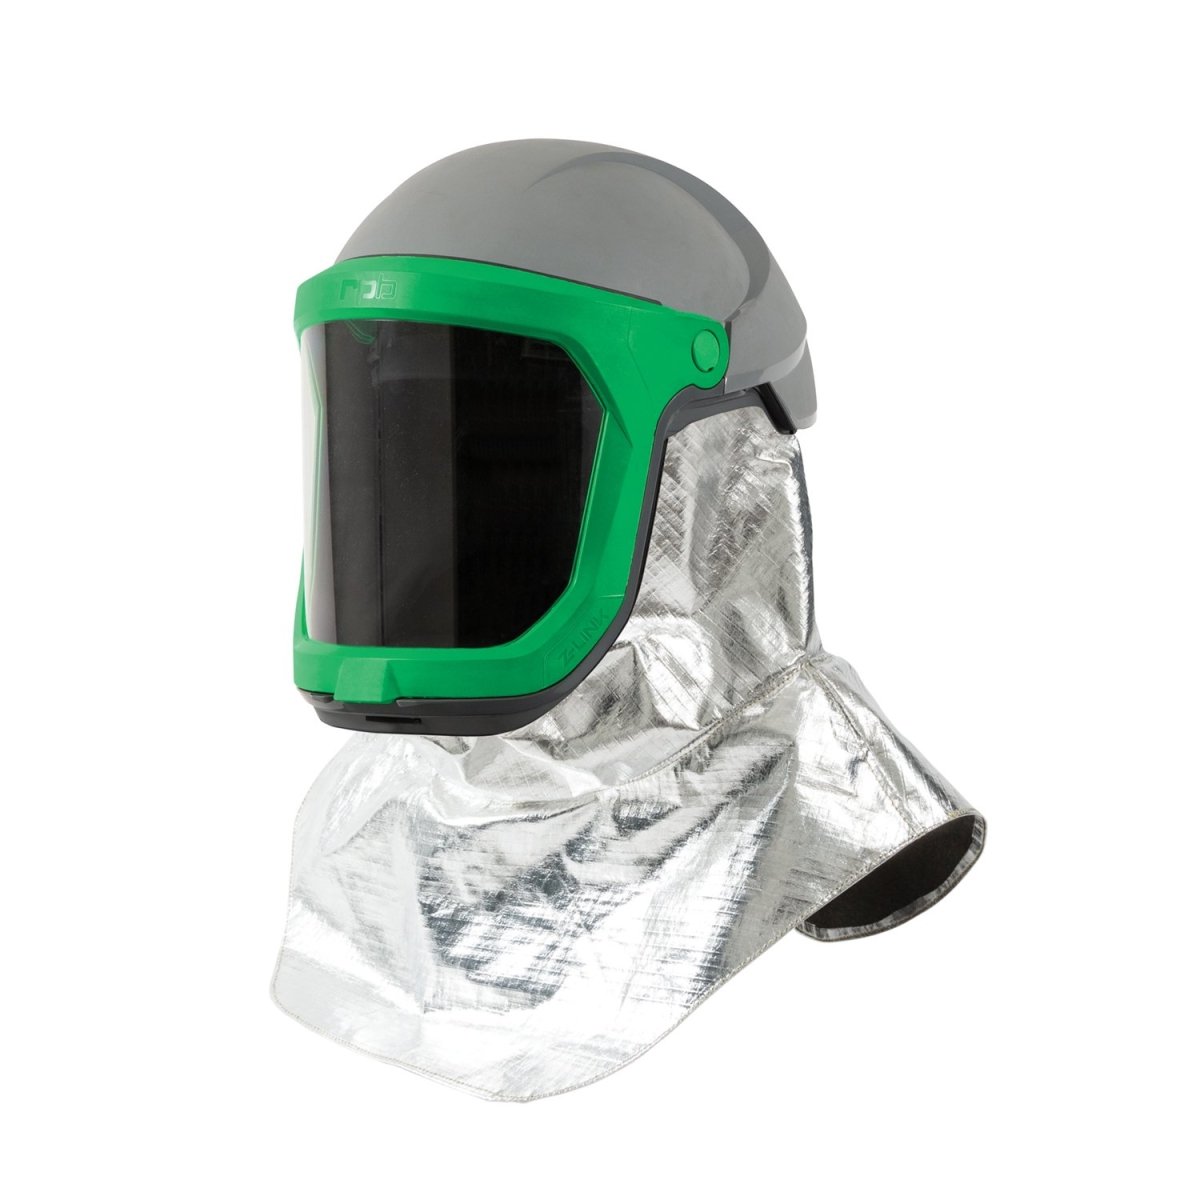 Z-Link Radiant Heat Respirator- Aluminized Covers and Shroud – X1 Safety